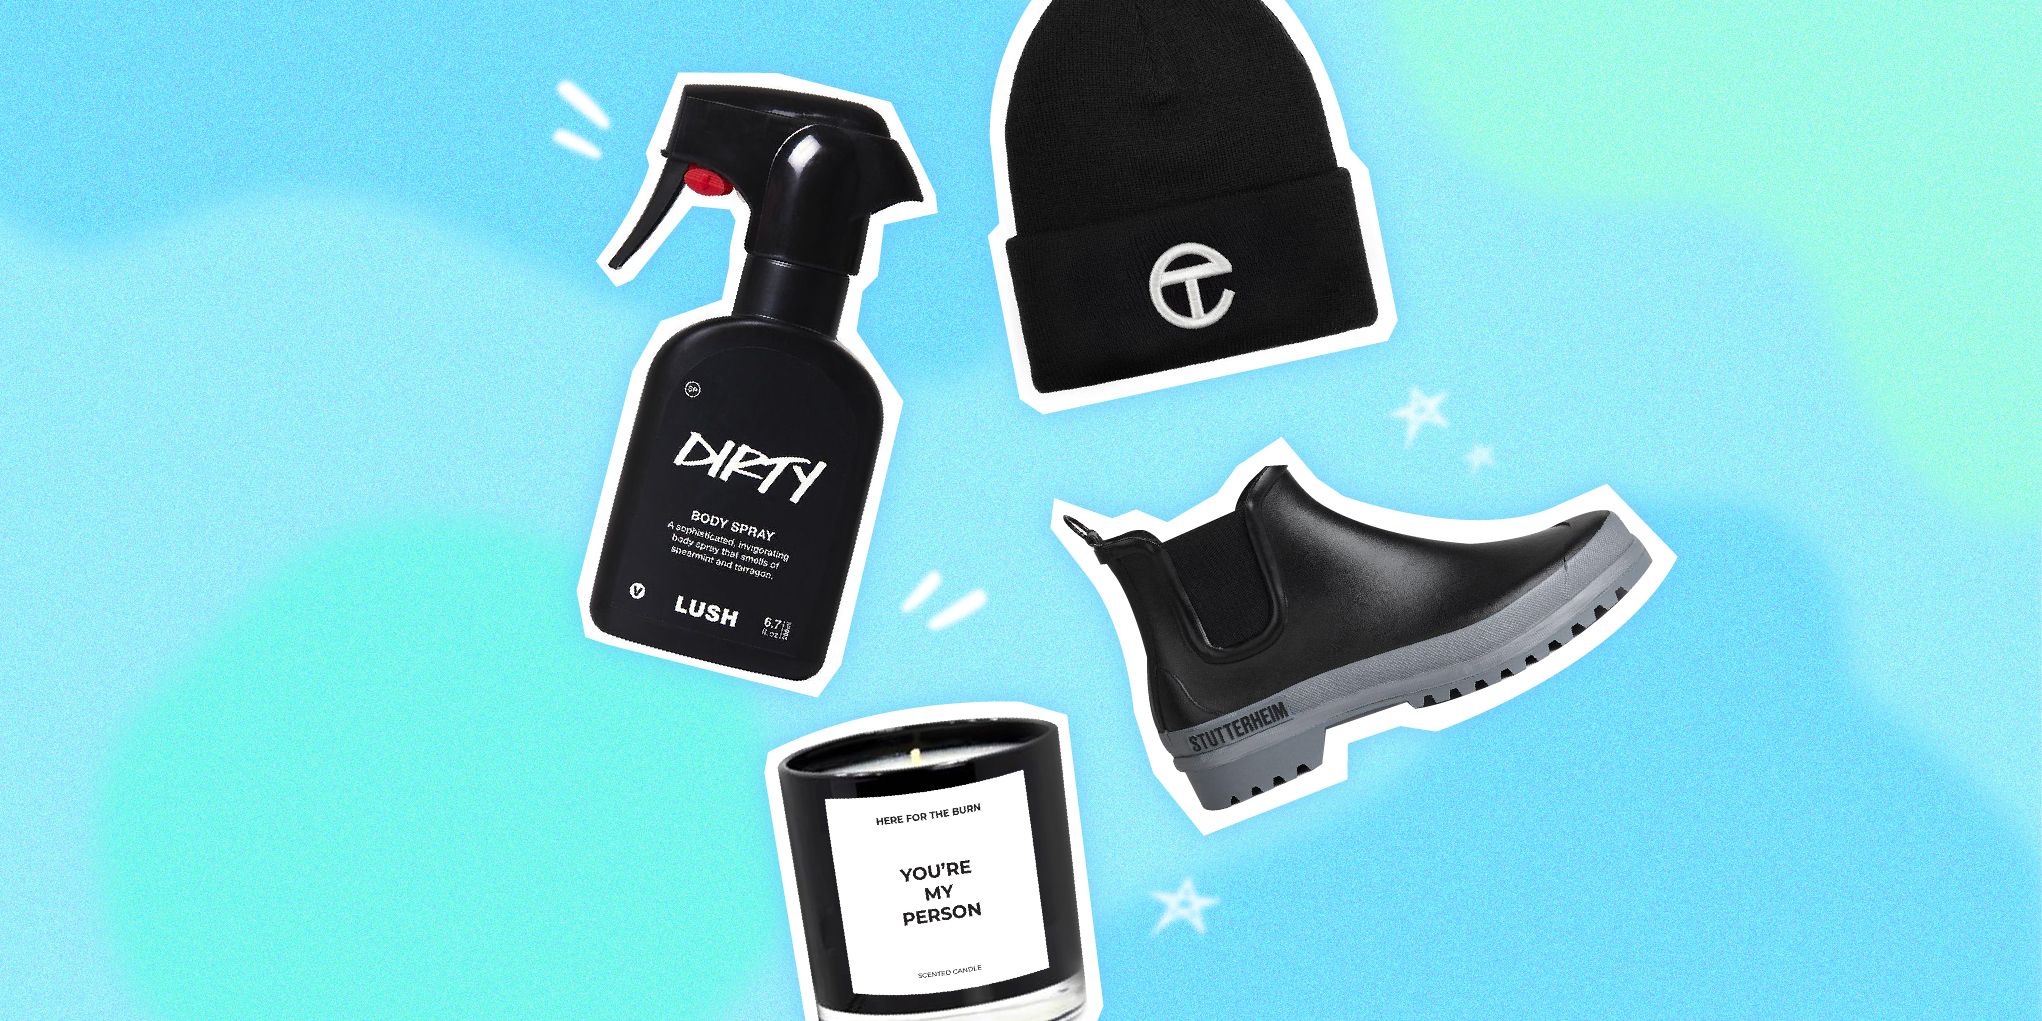 What to get your guy best friend for valentines day